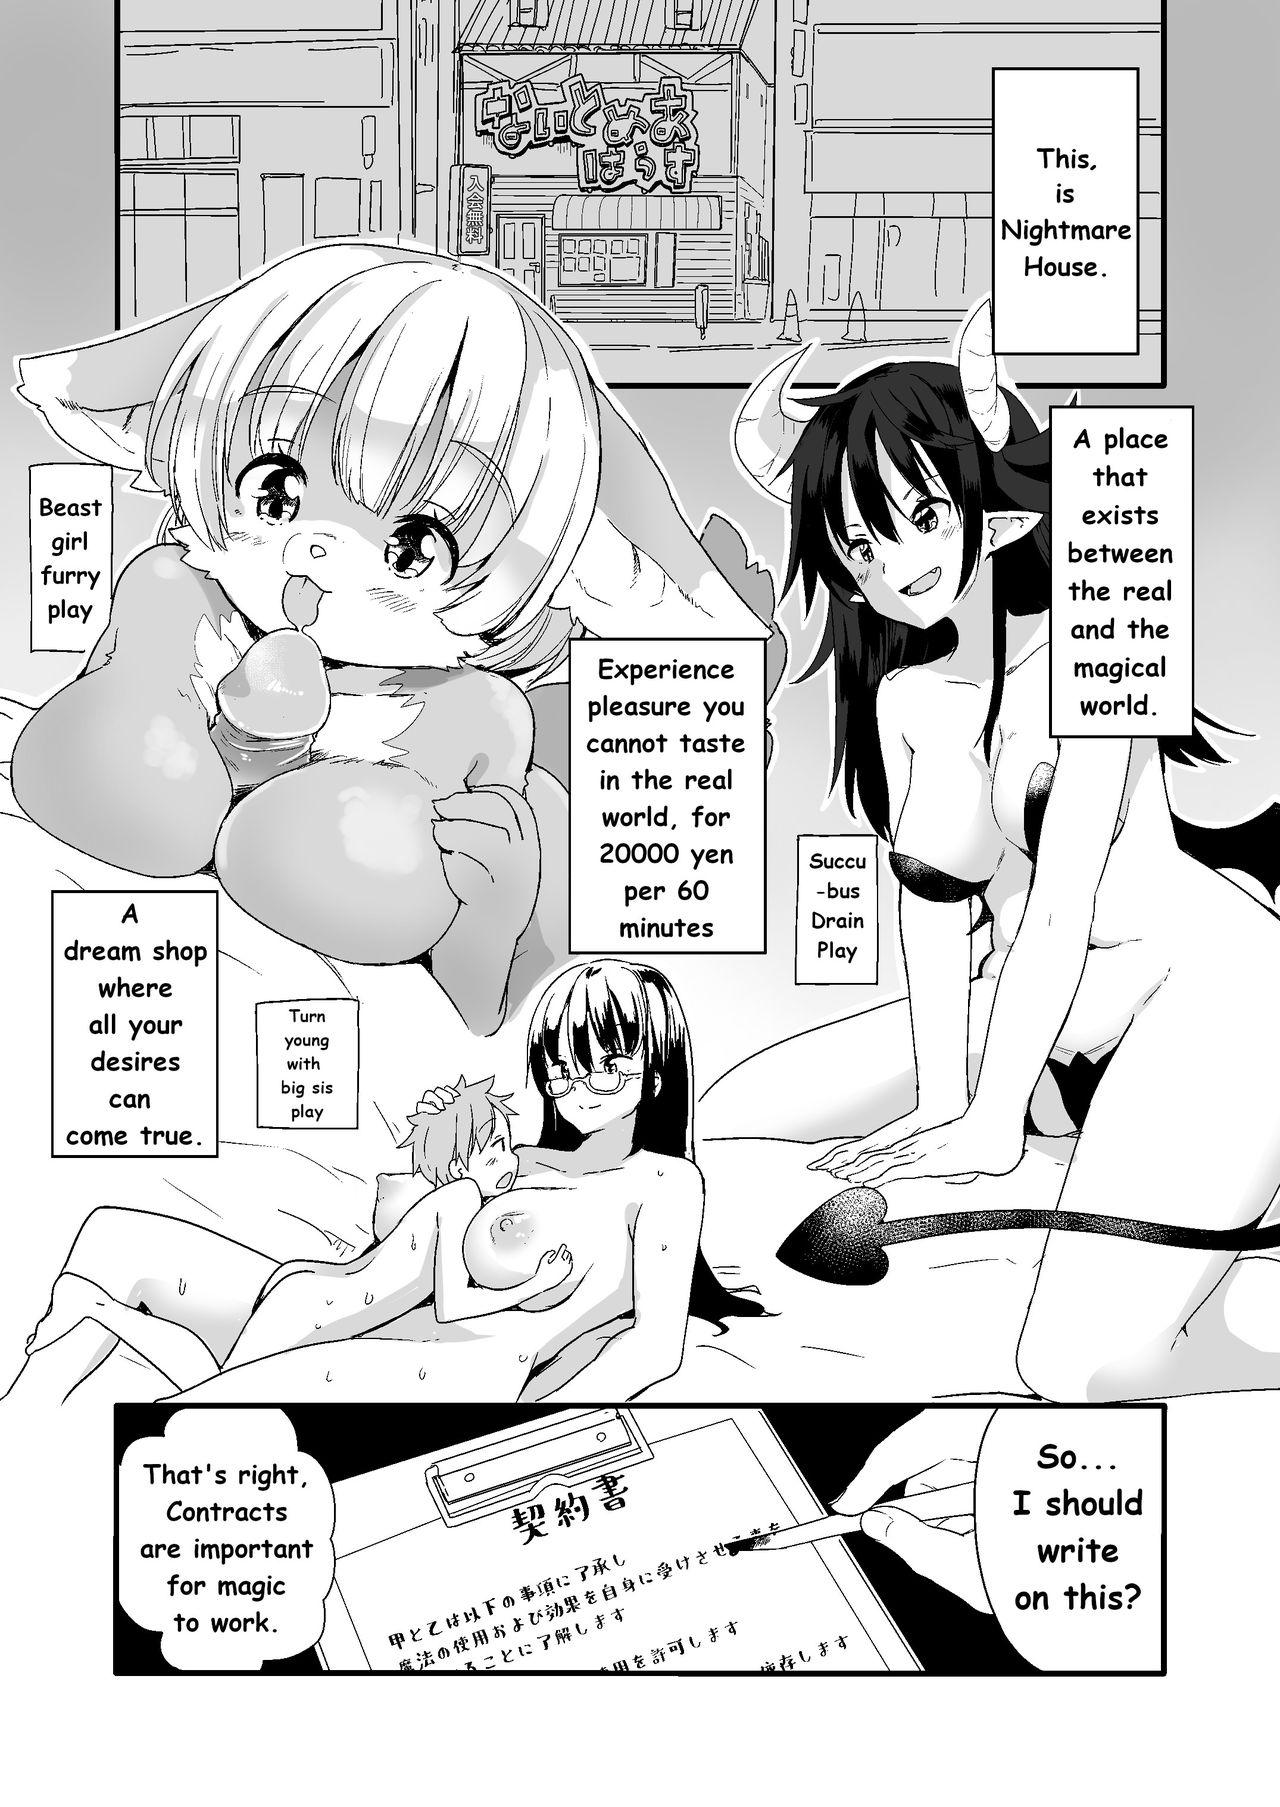 Club Nightmare House e Youkoso | Welcome to the Nightmare House - Original Small Boobs - Page 1